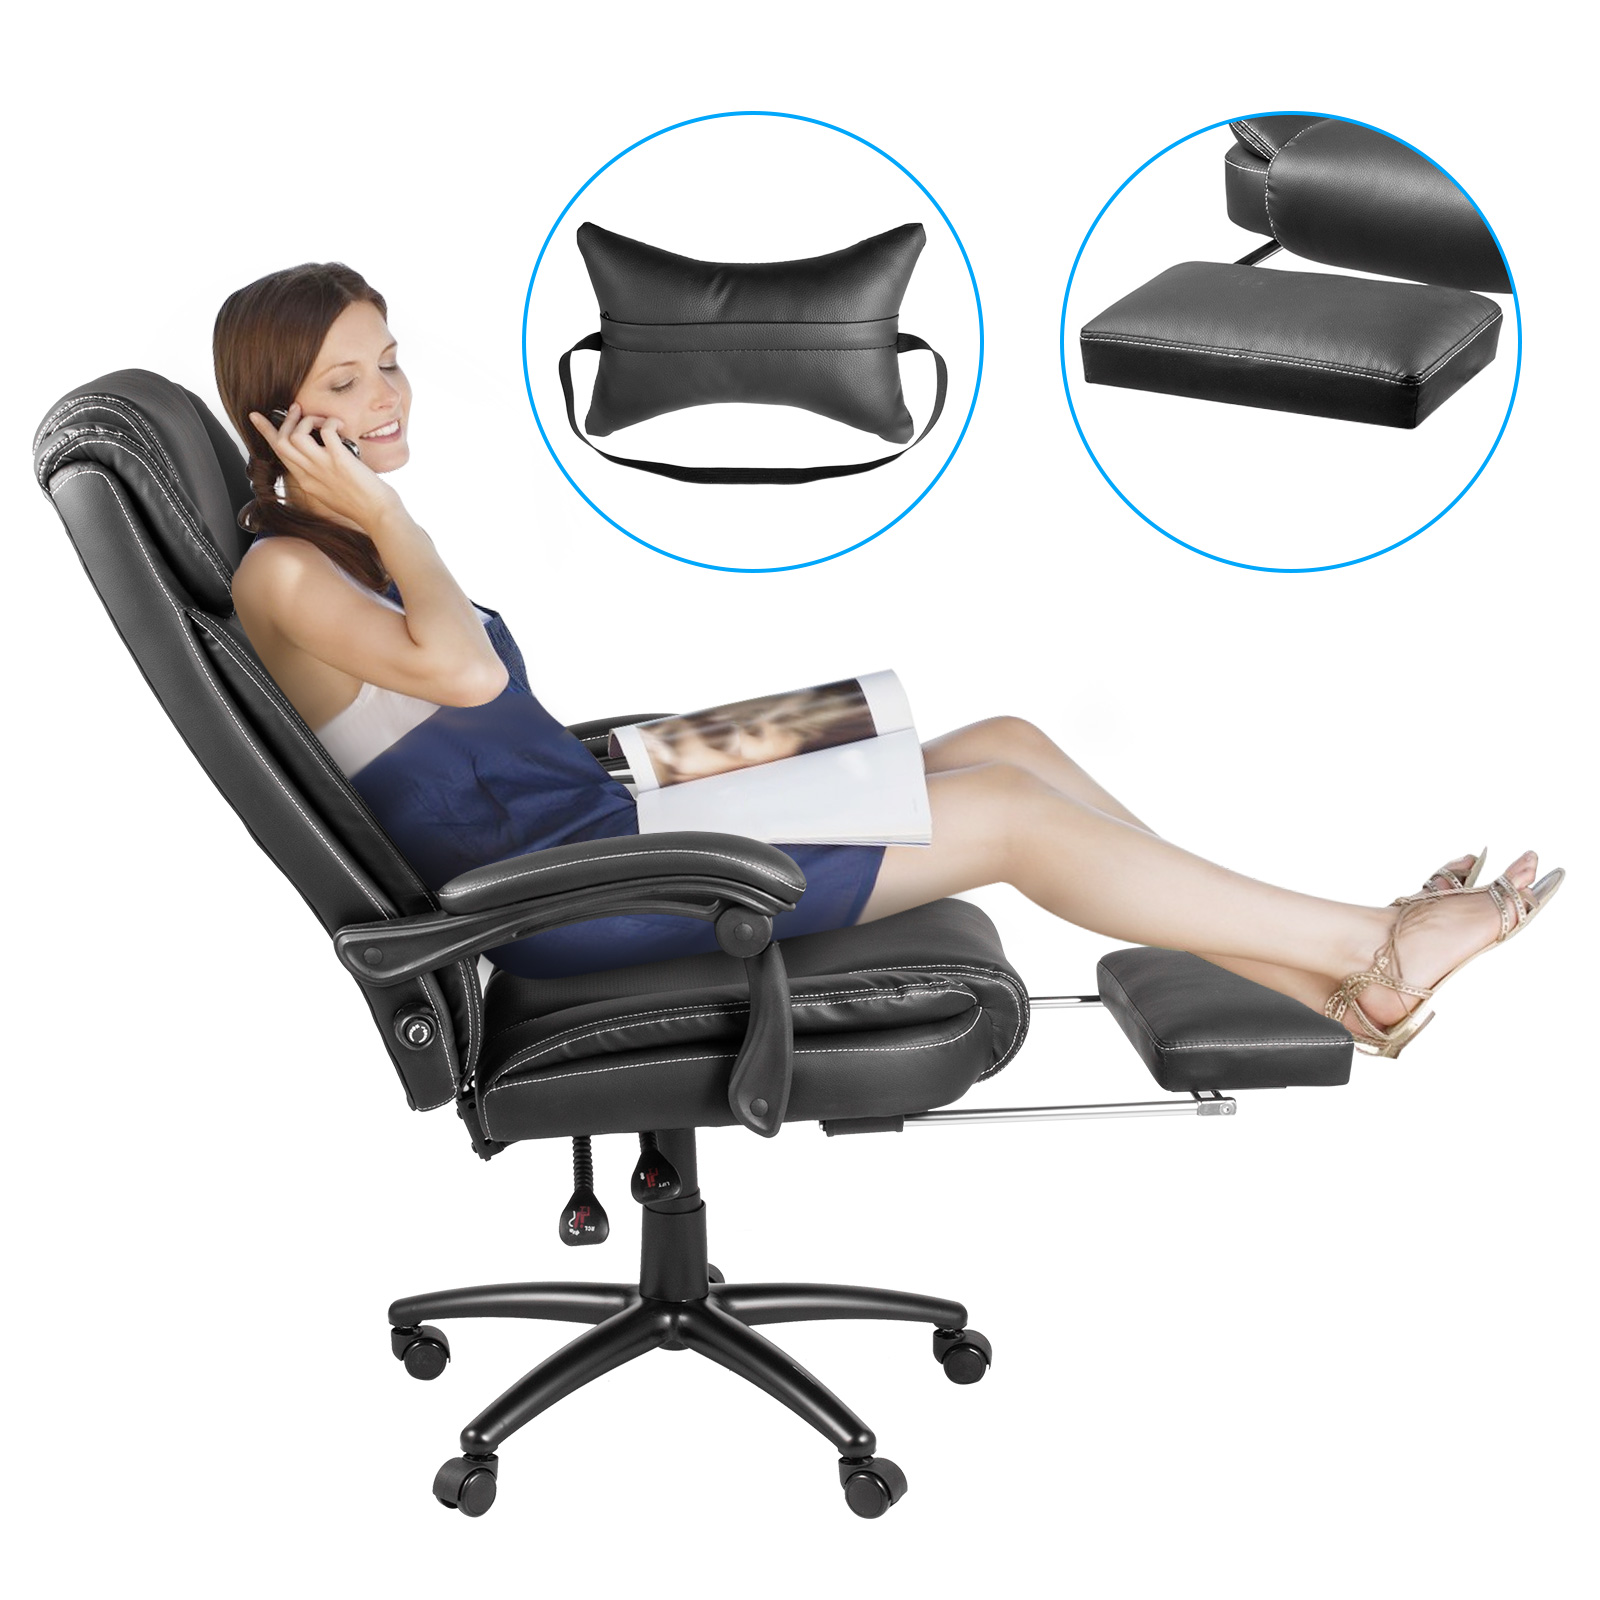 https://d2qc09rl1gfuof.cloudfront.net/product/BGY928GDDXYPGY001/executive-chair-m100-6.jpg